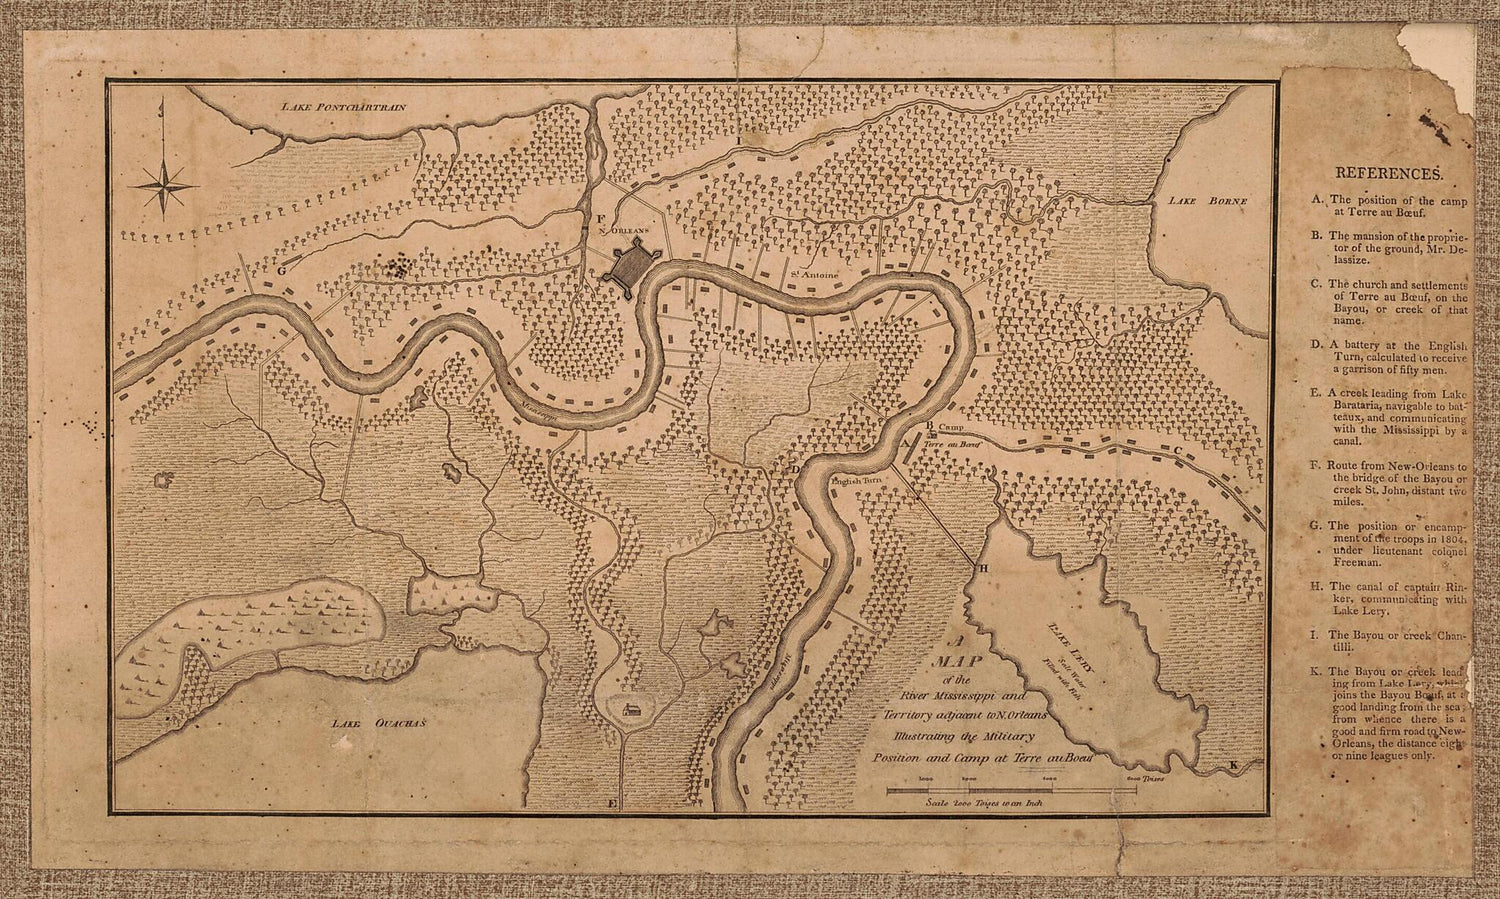 This old map of A Map of the River Mississippi and Territory Adjacent to N. Orleans Illustrating the Military Position and Camp at Terre Au Boeuf from 1815 was created by  in 1815